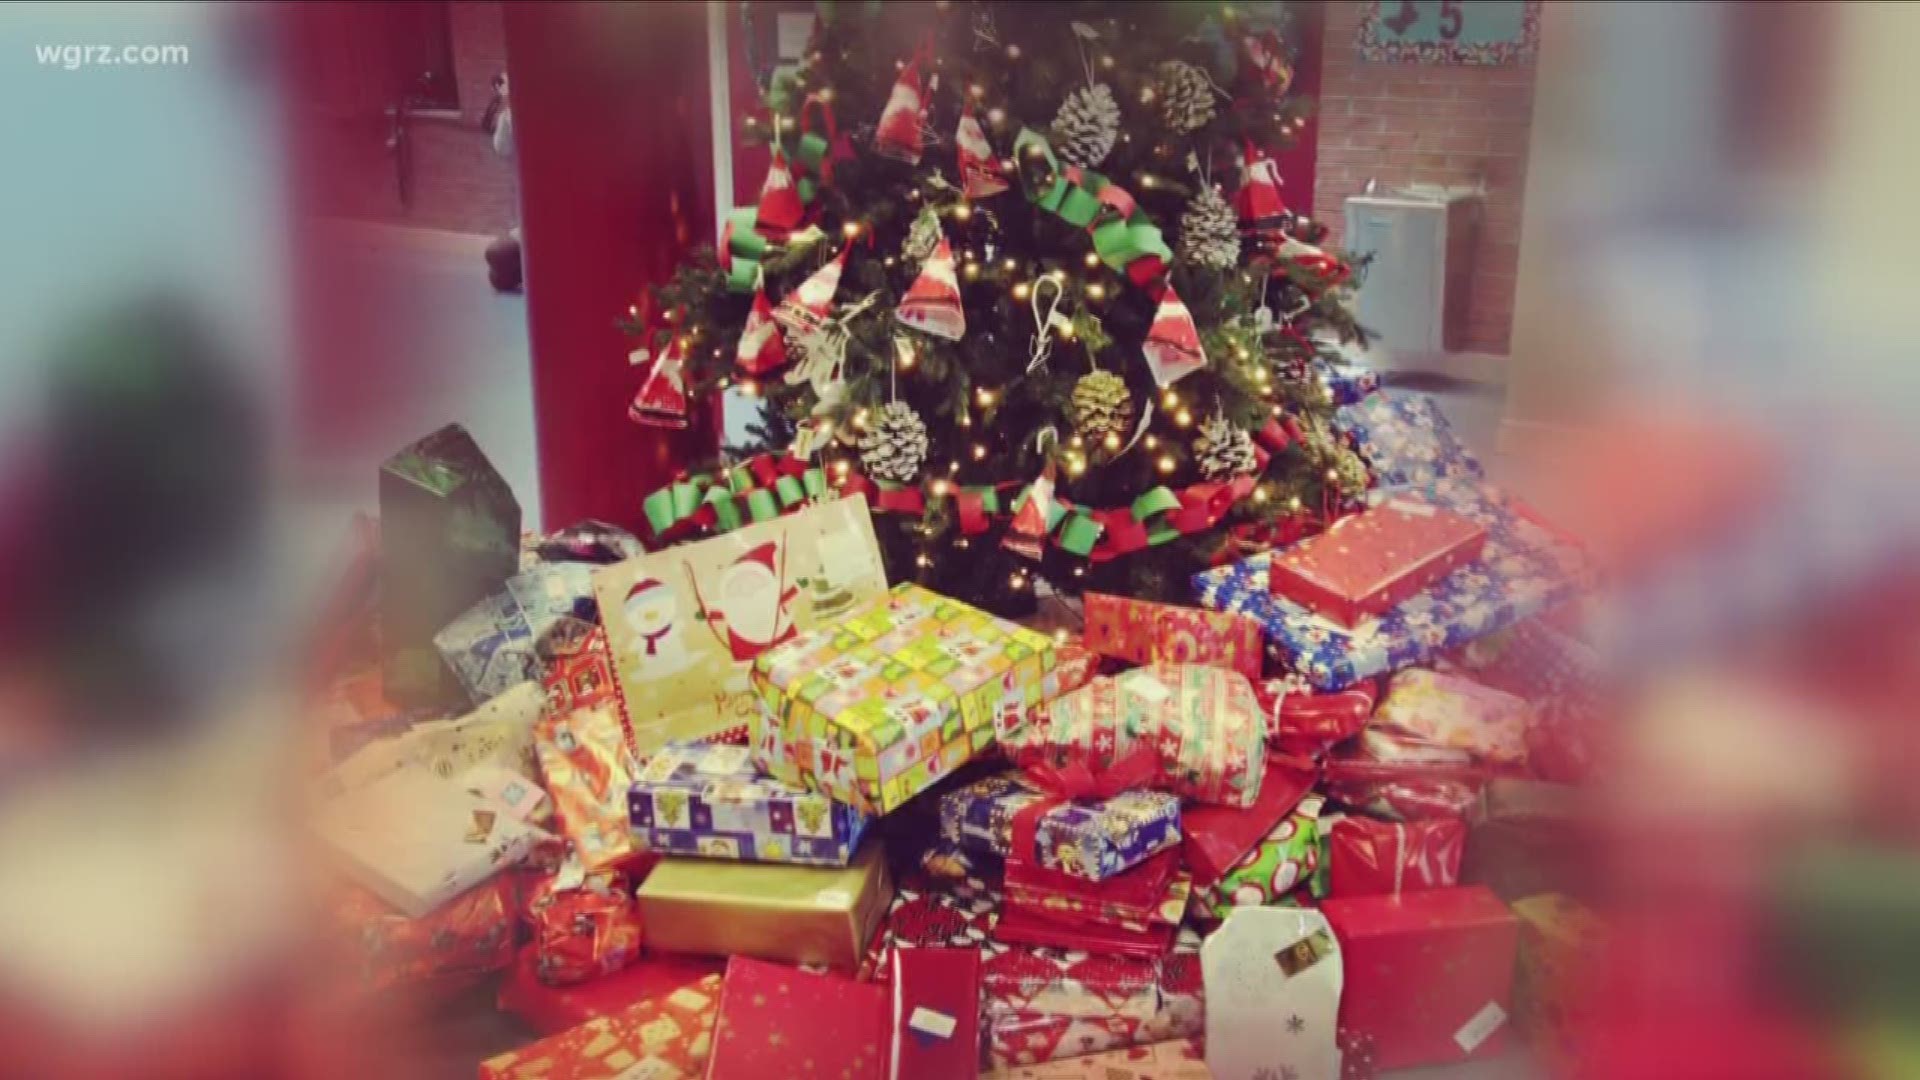 Niagara Falls fire fighters Christmas Toy Fund helps bring presents to over 1100 Niagara Falls children.